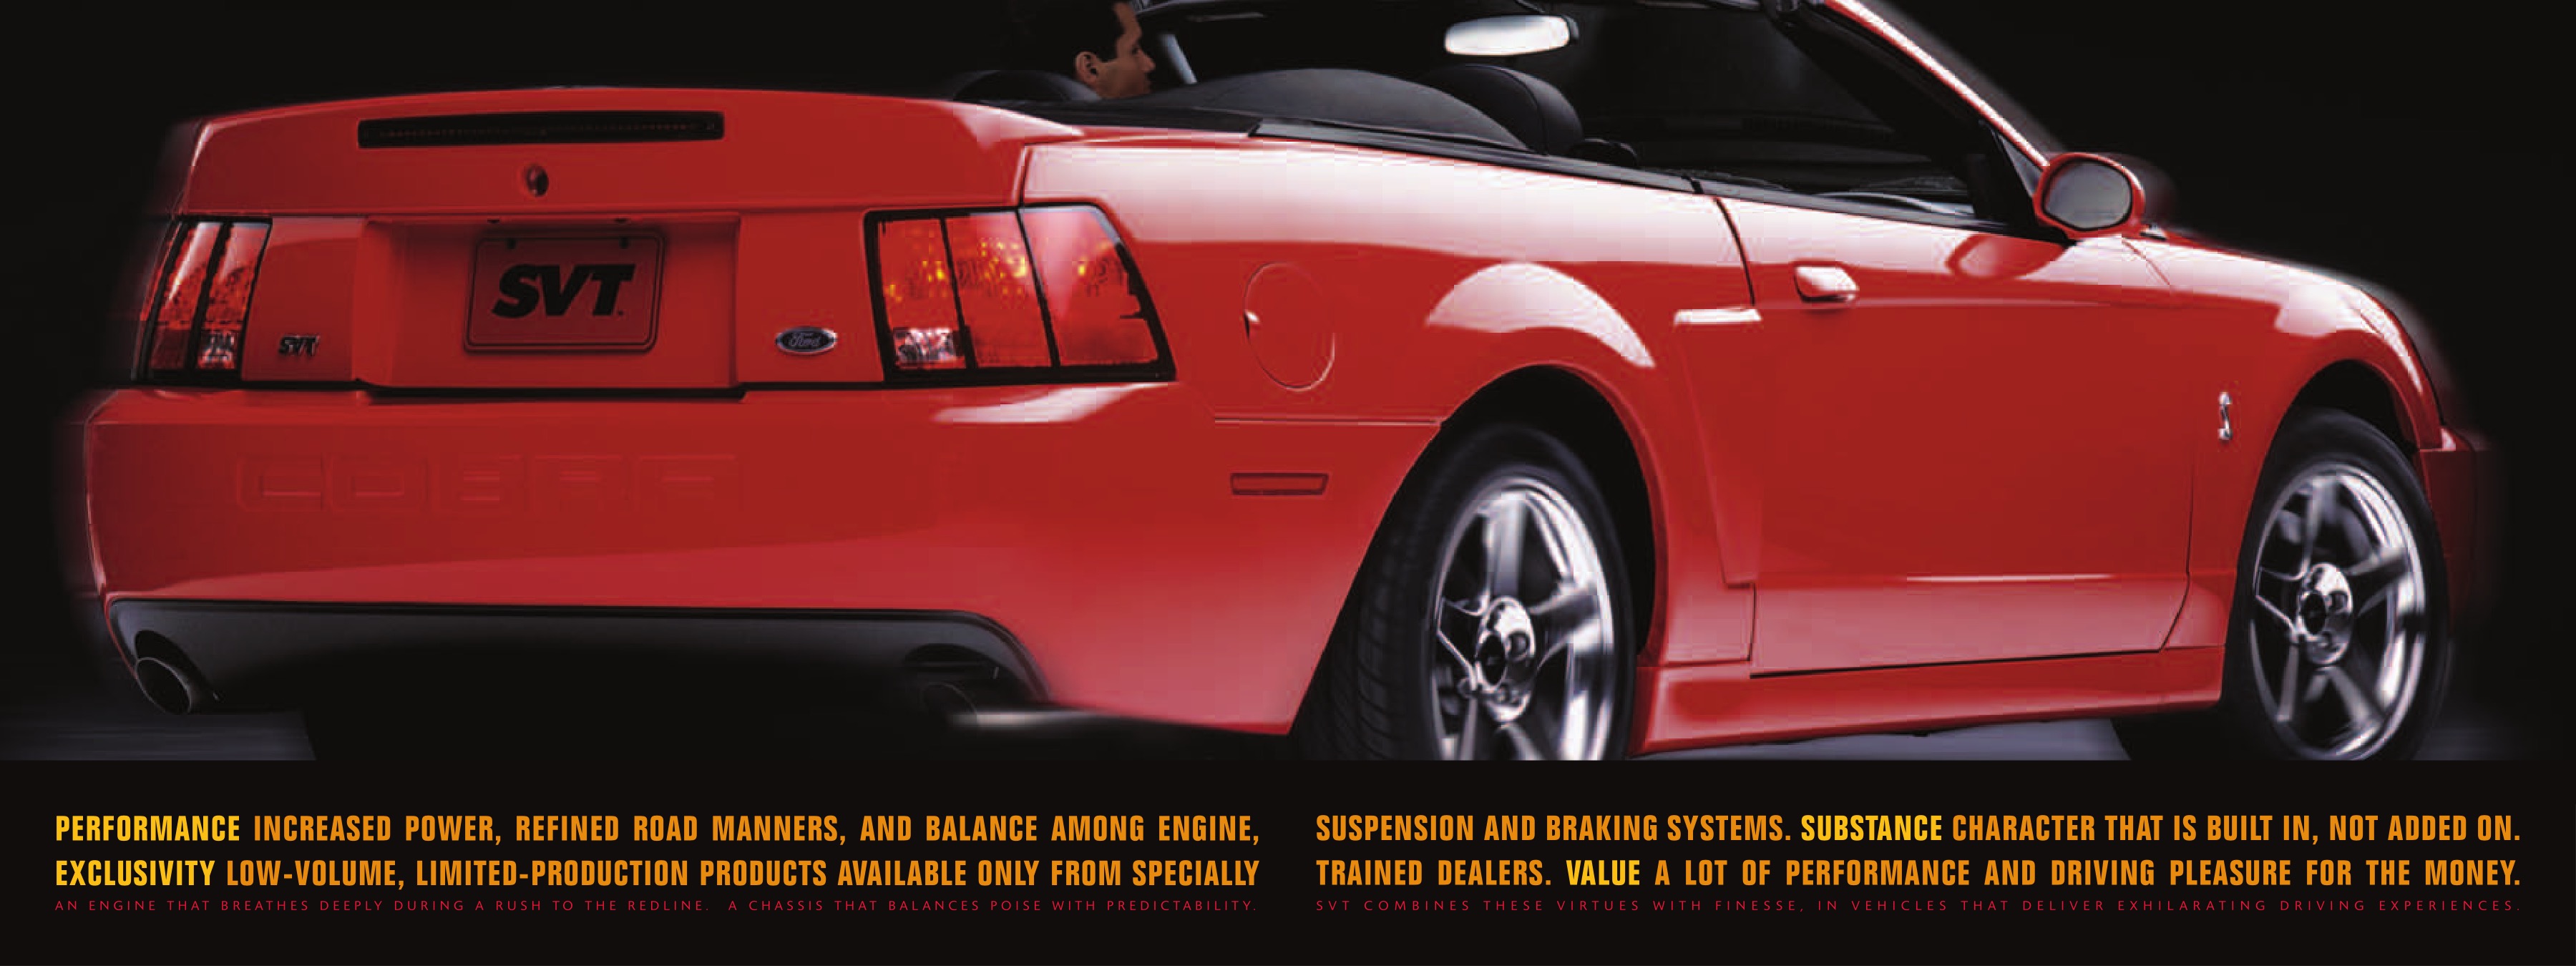 2004 Ford Mustang Cobra Brochure Page 3